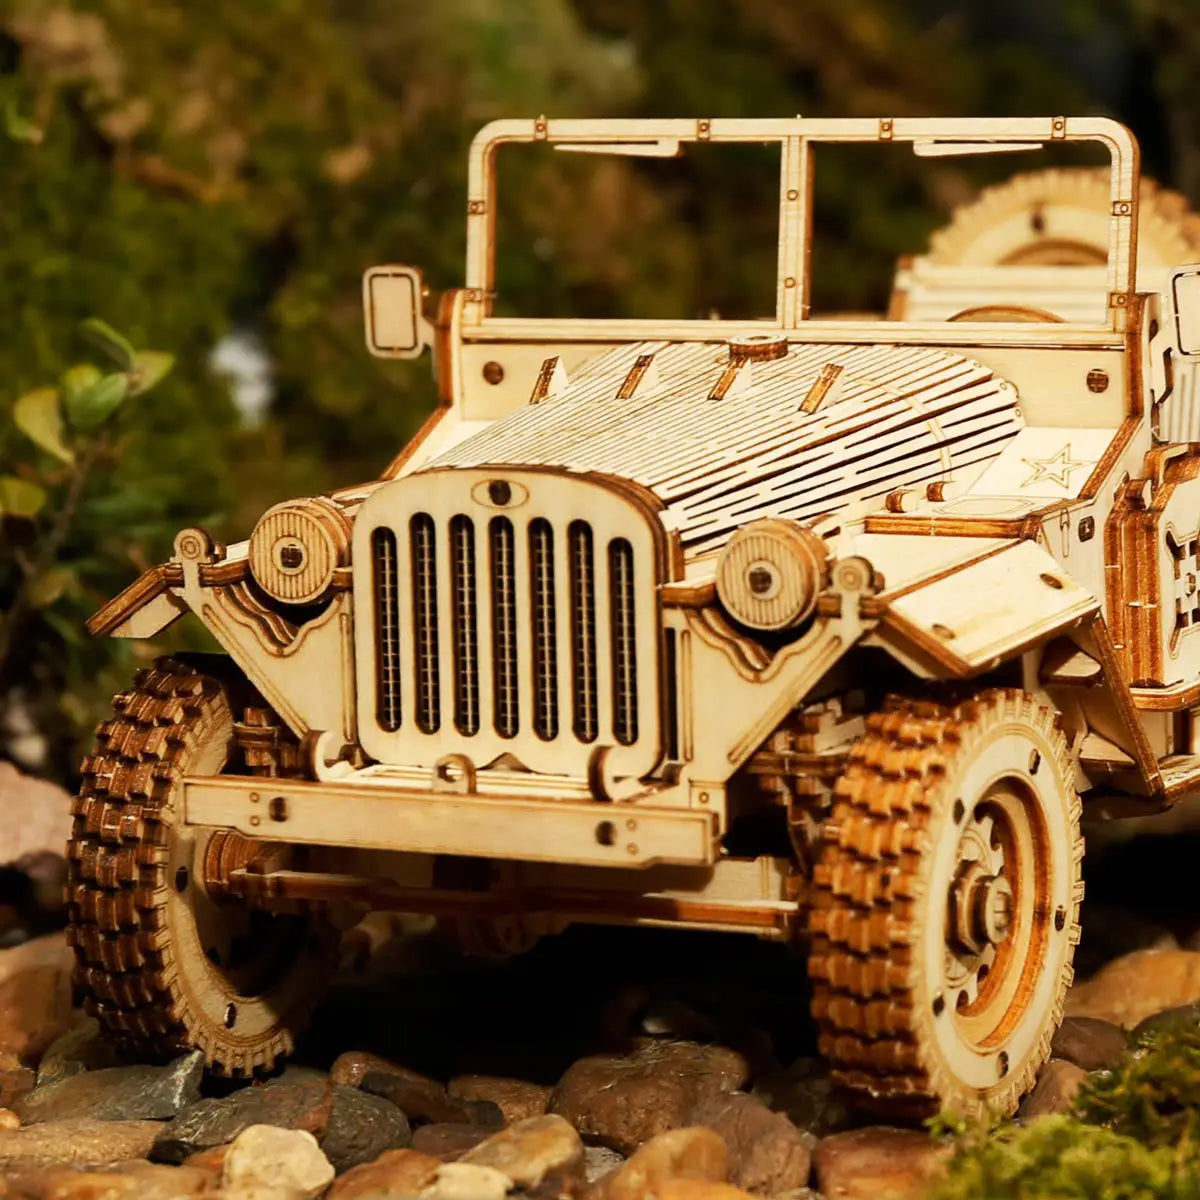 Puzzle 3D de Madera Jeep Willys Militar